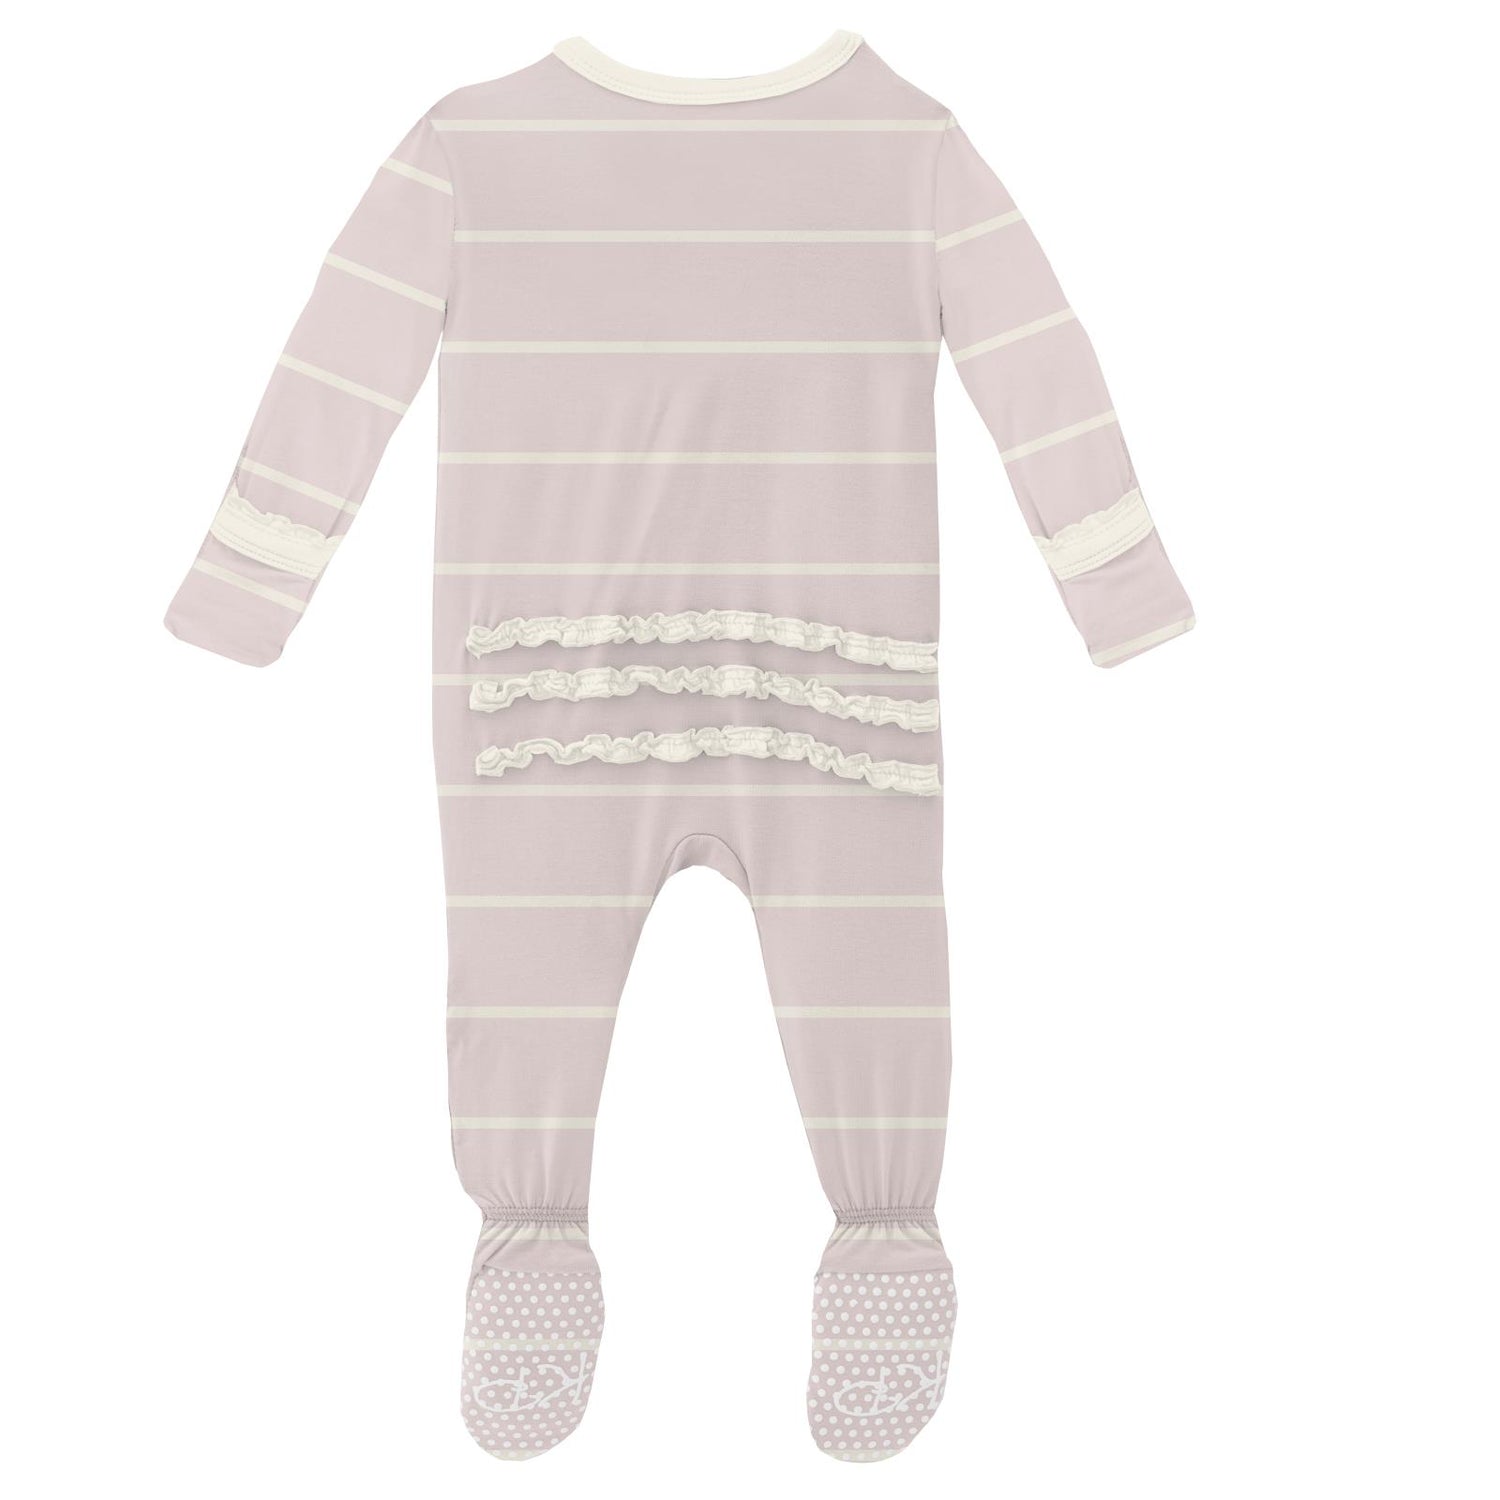 Print Muffin Ruffle Footie with Snaps in Macaroon Road Trip Stripe